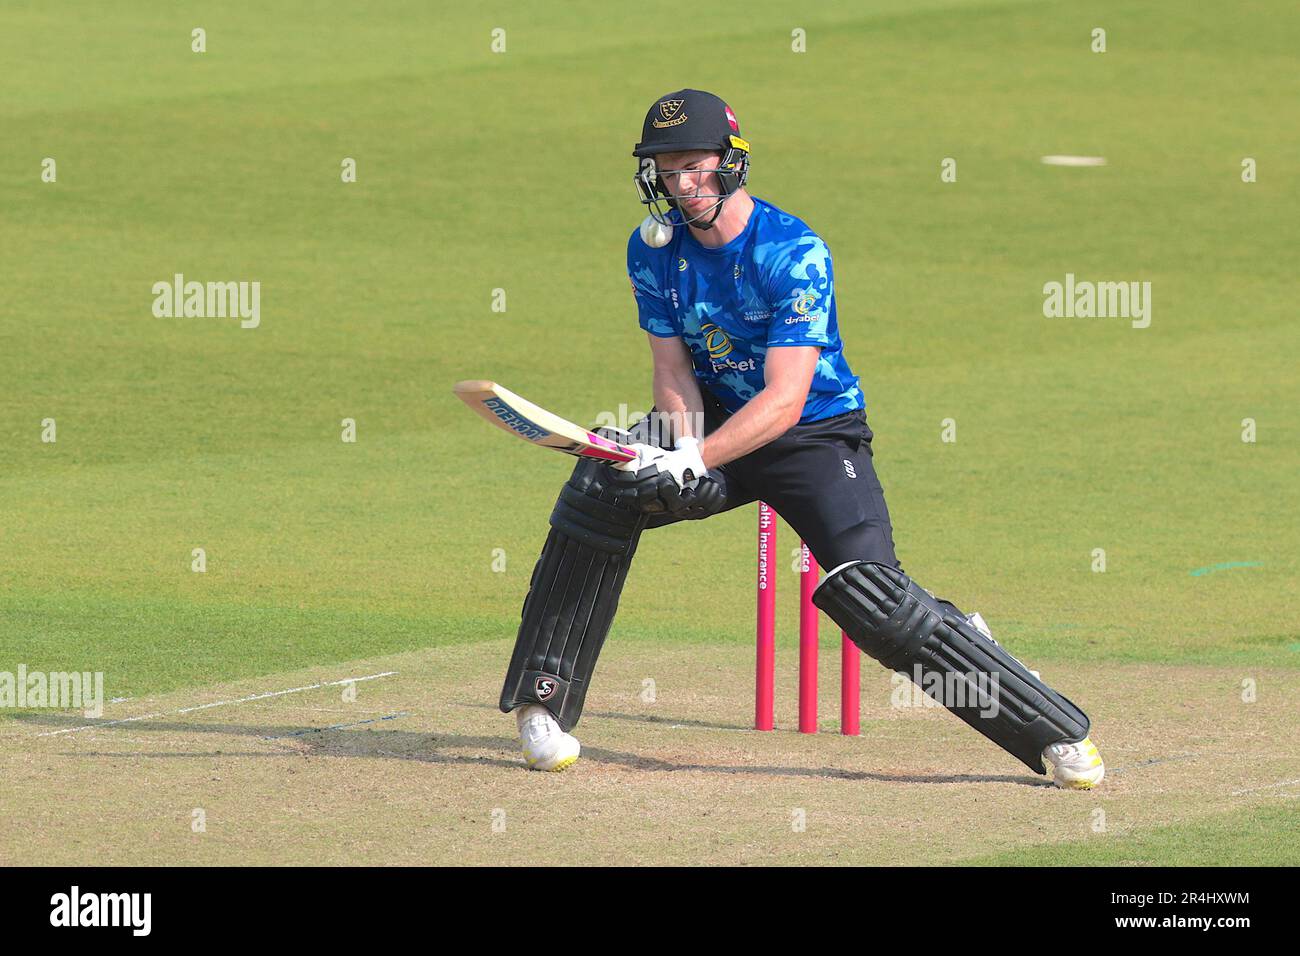 London, UK. 28th May, 2023. Sussex's George Garton gets it wrong and hits the ball onto his own helmet off the bowling of Sam Curran as Surrey take on Sussex Sharks in the Vitality T20 Blast cricket match at The Kia Oval. Credit: David Rowe/Alamy Live News Stock Photo